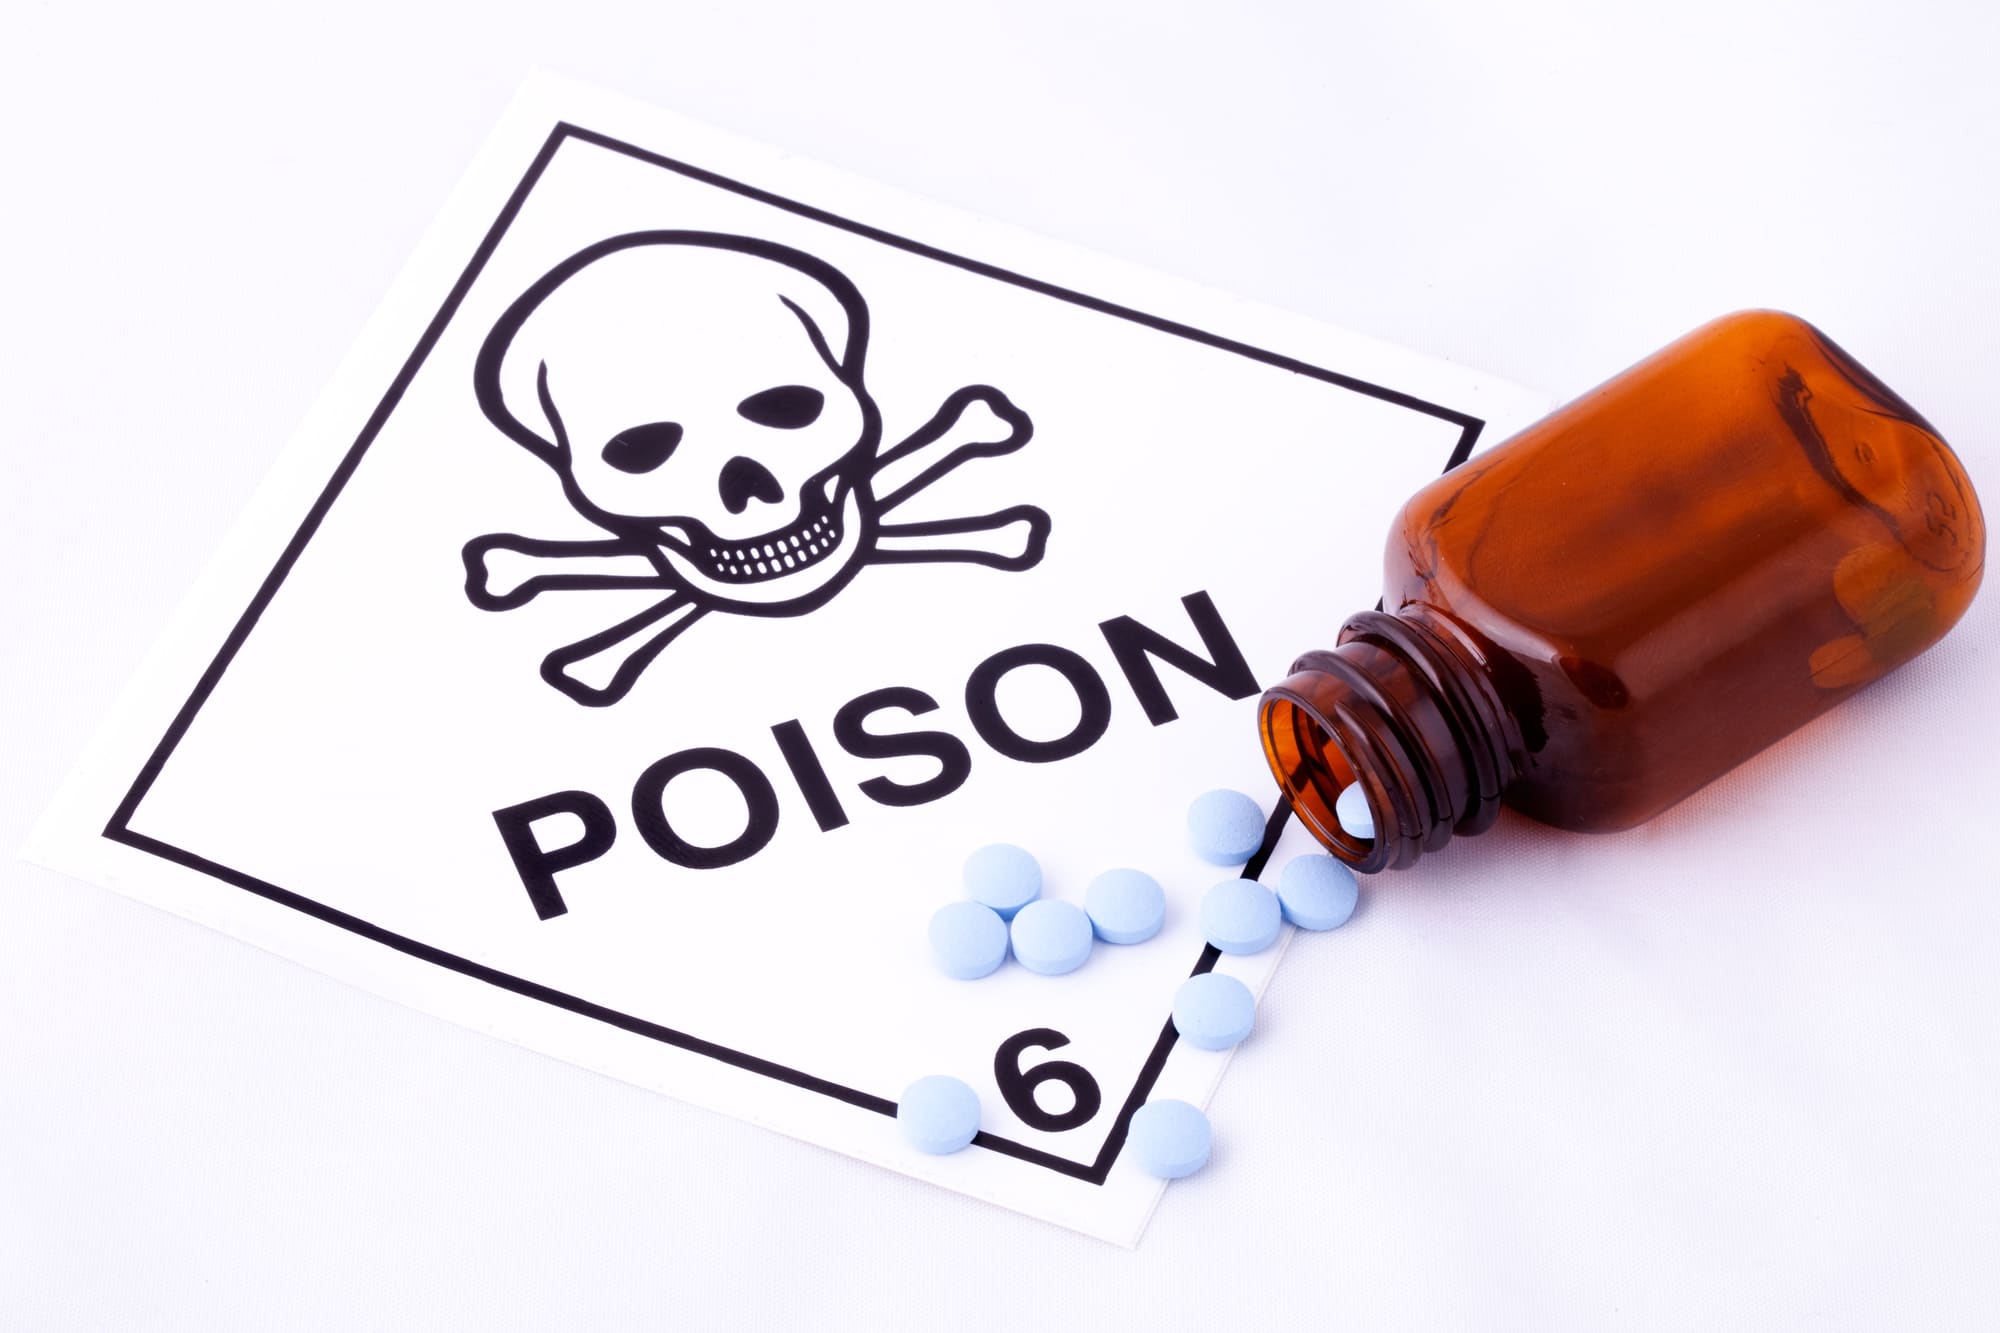 The Top 10 Poison Dangers For Children Might Surprise You